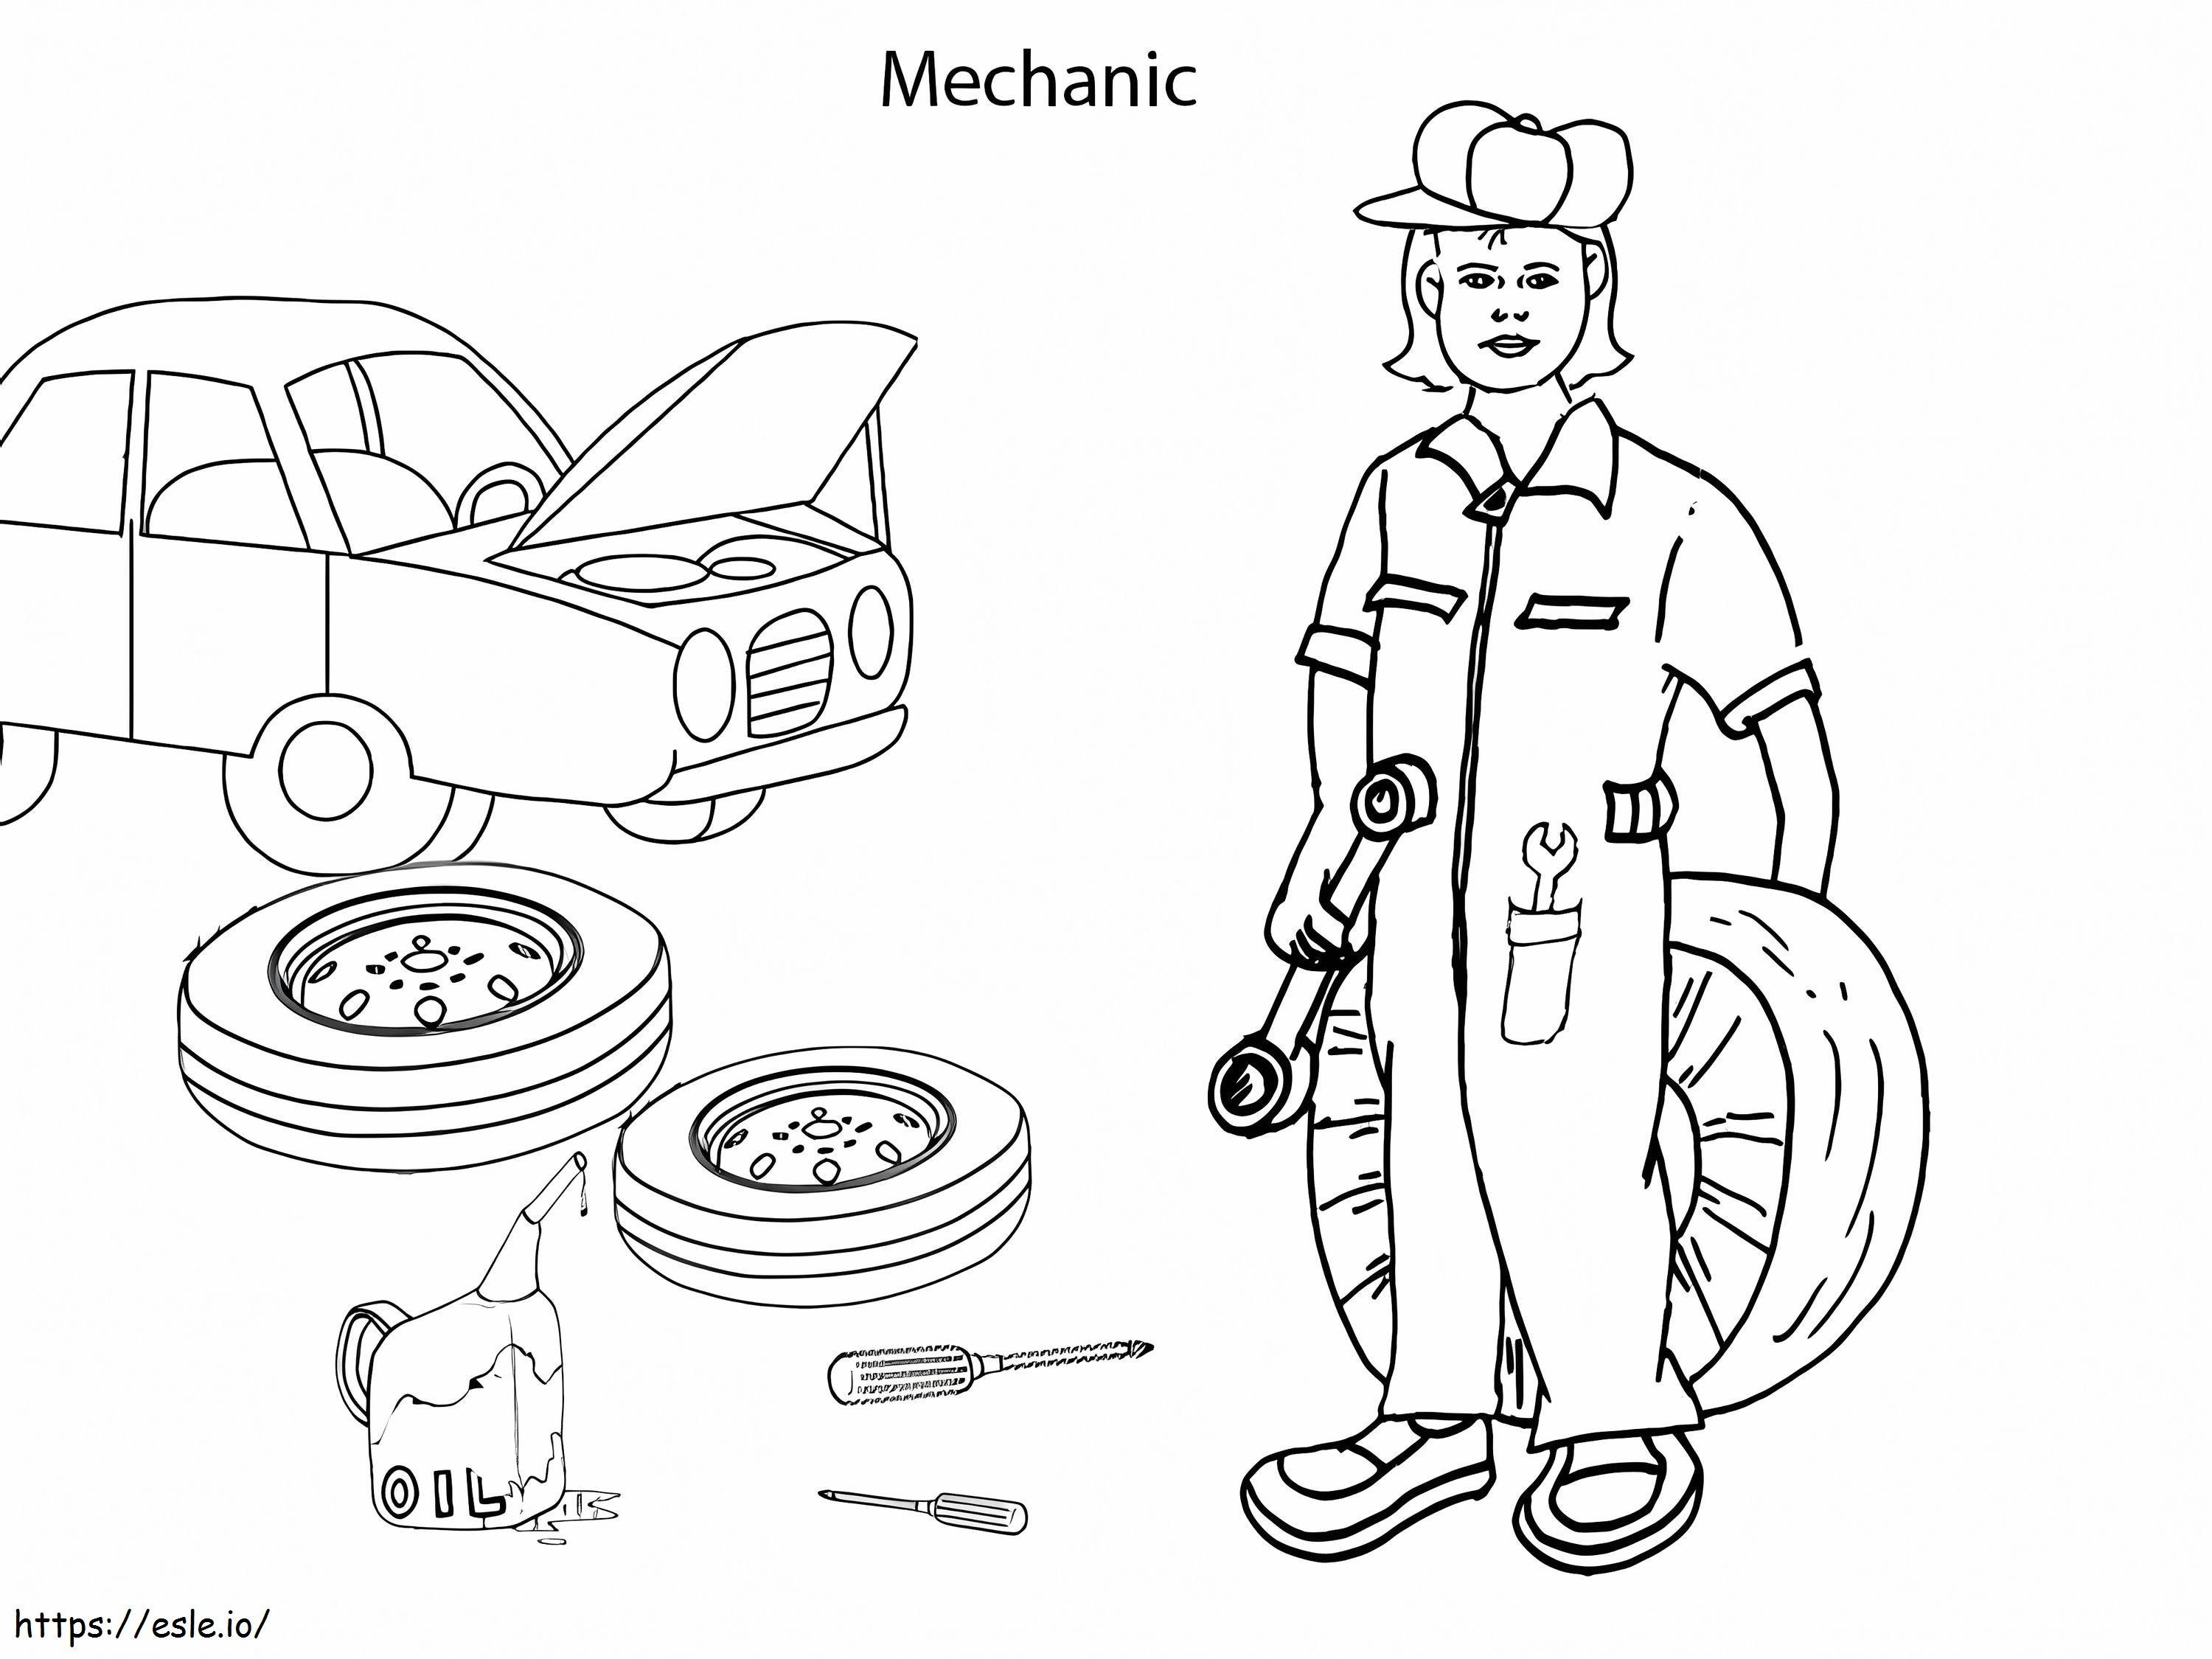 Mechanic 11 coloring page